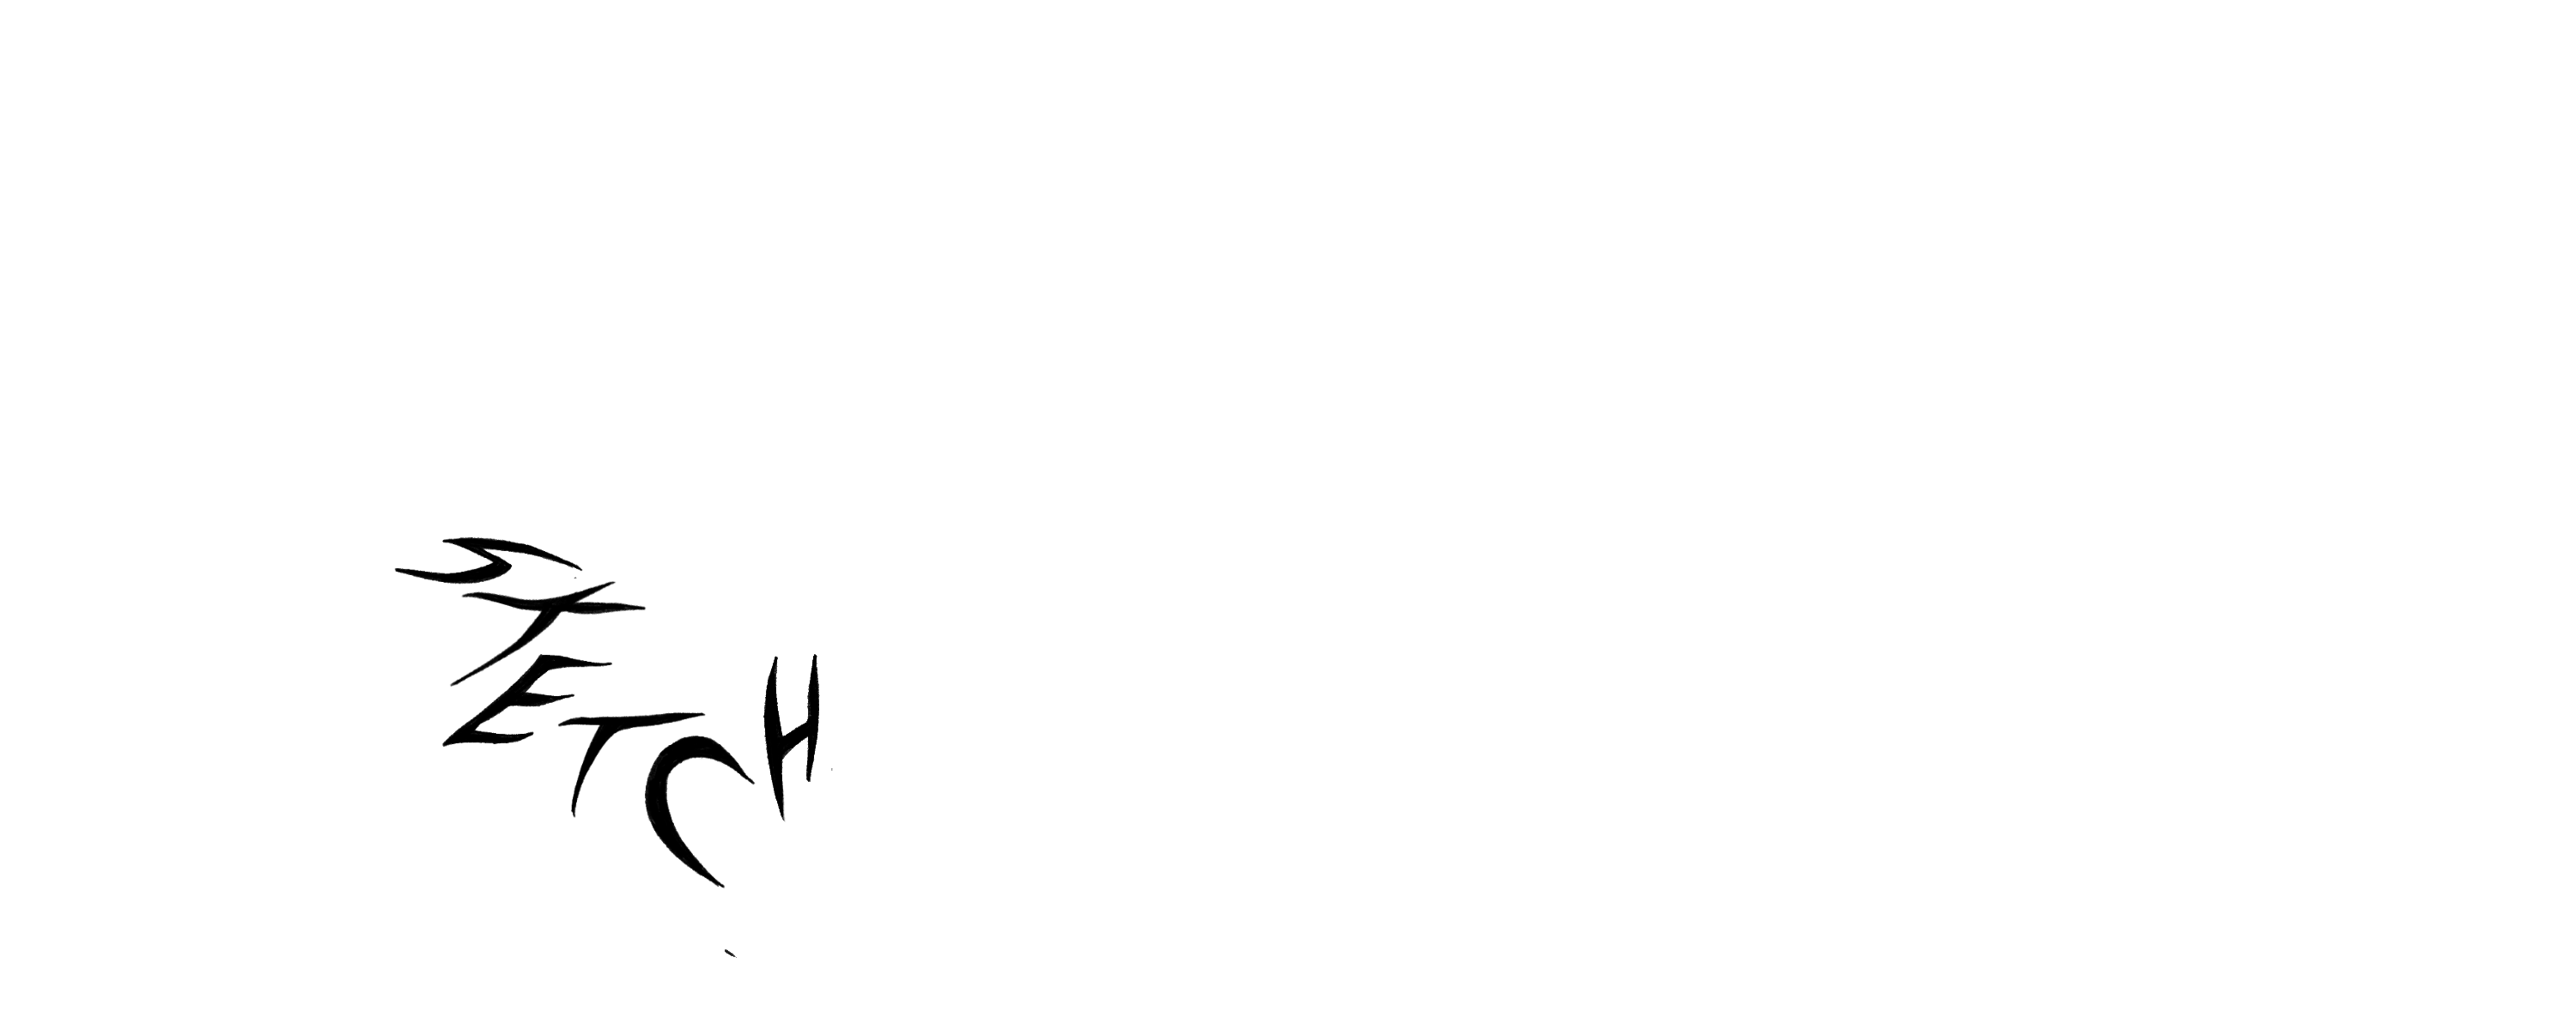 A drawing of four transmission towers amidst a lightning strike.